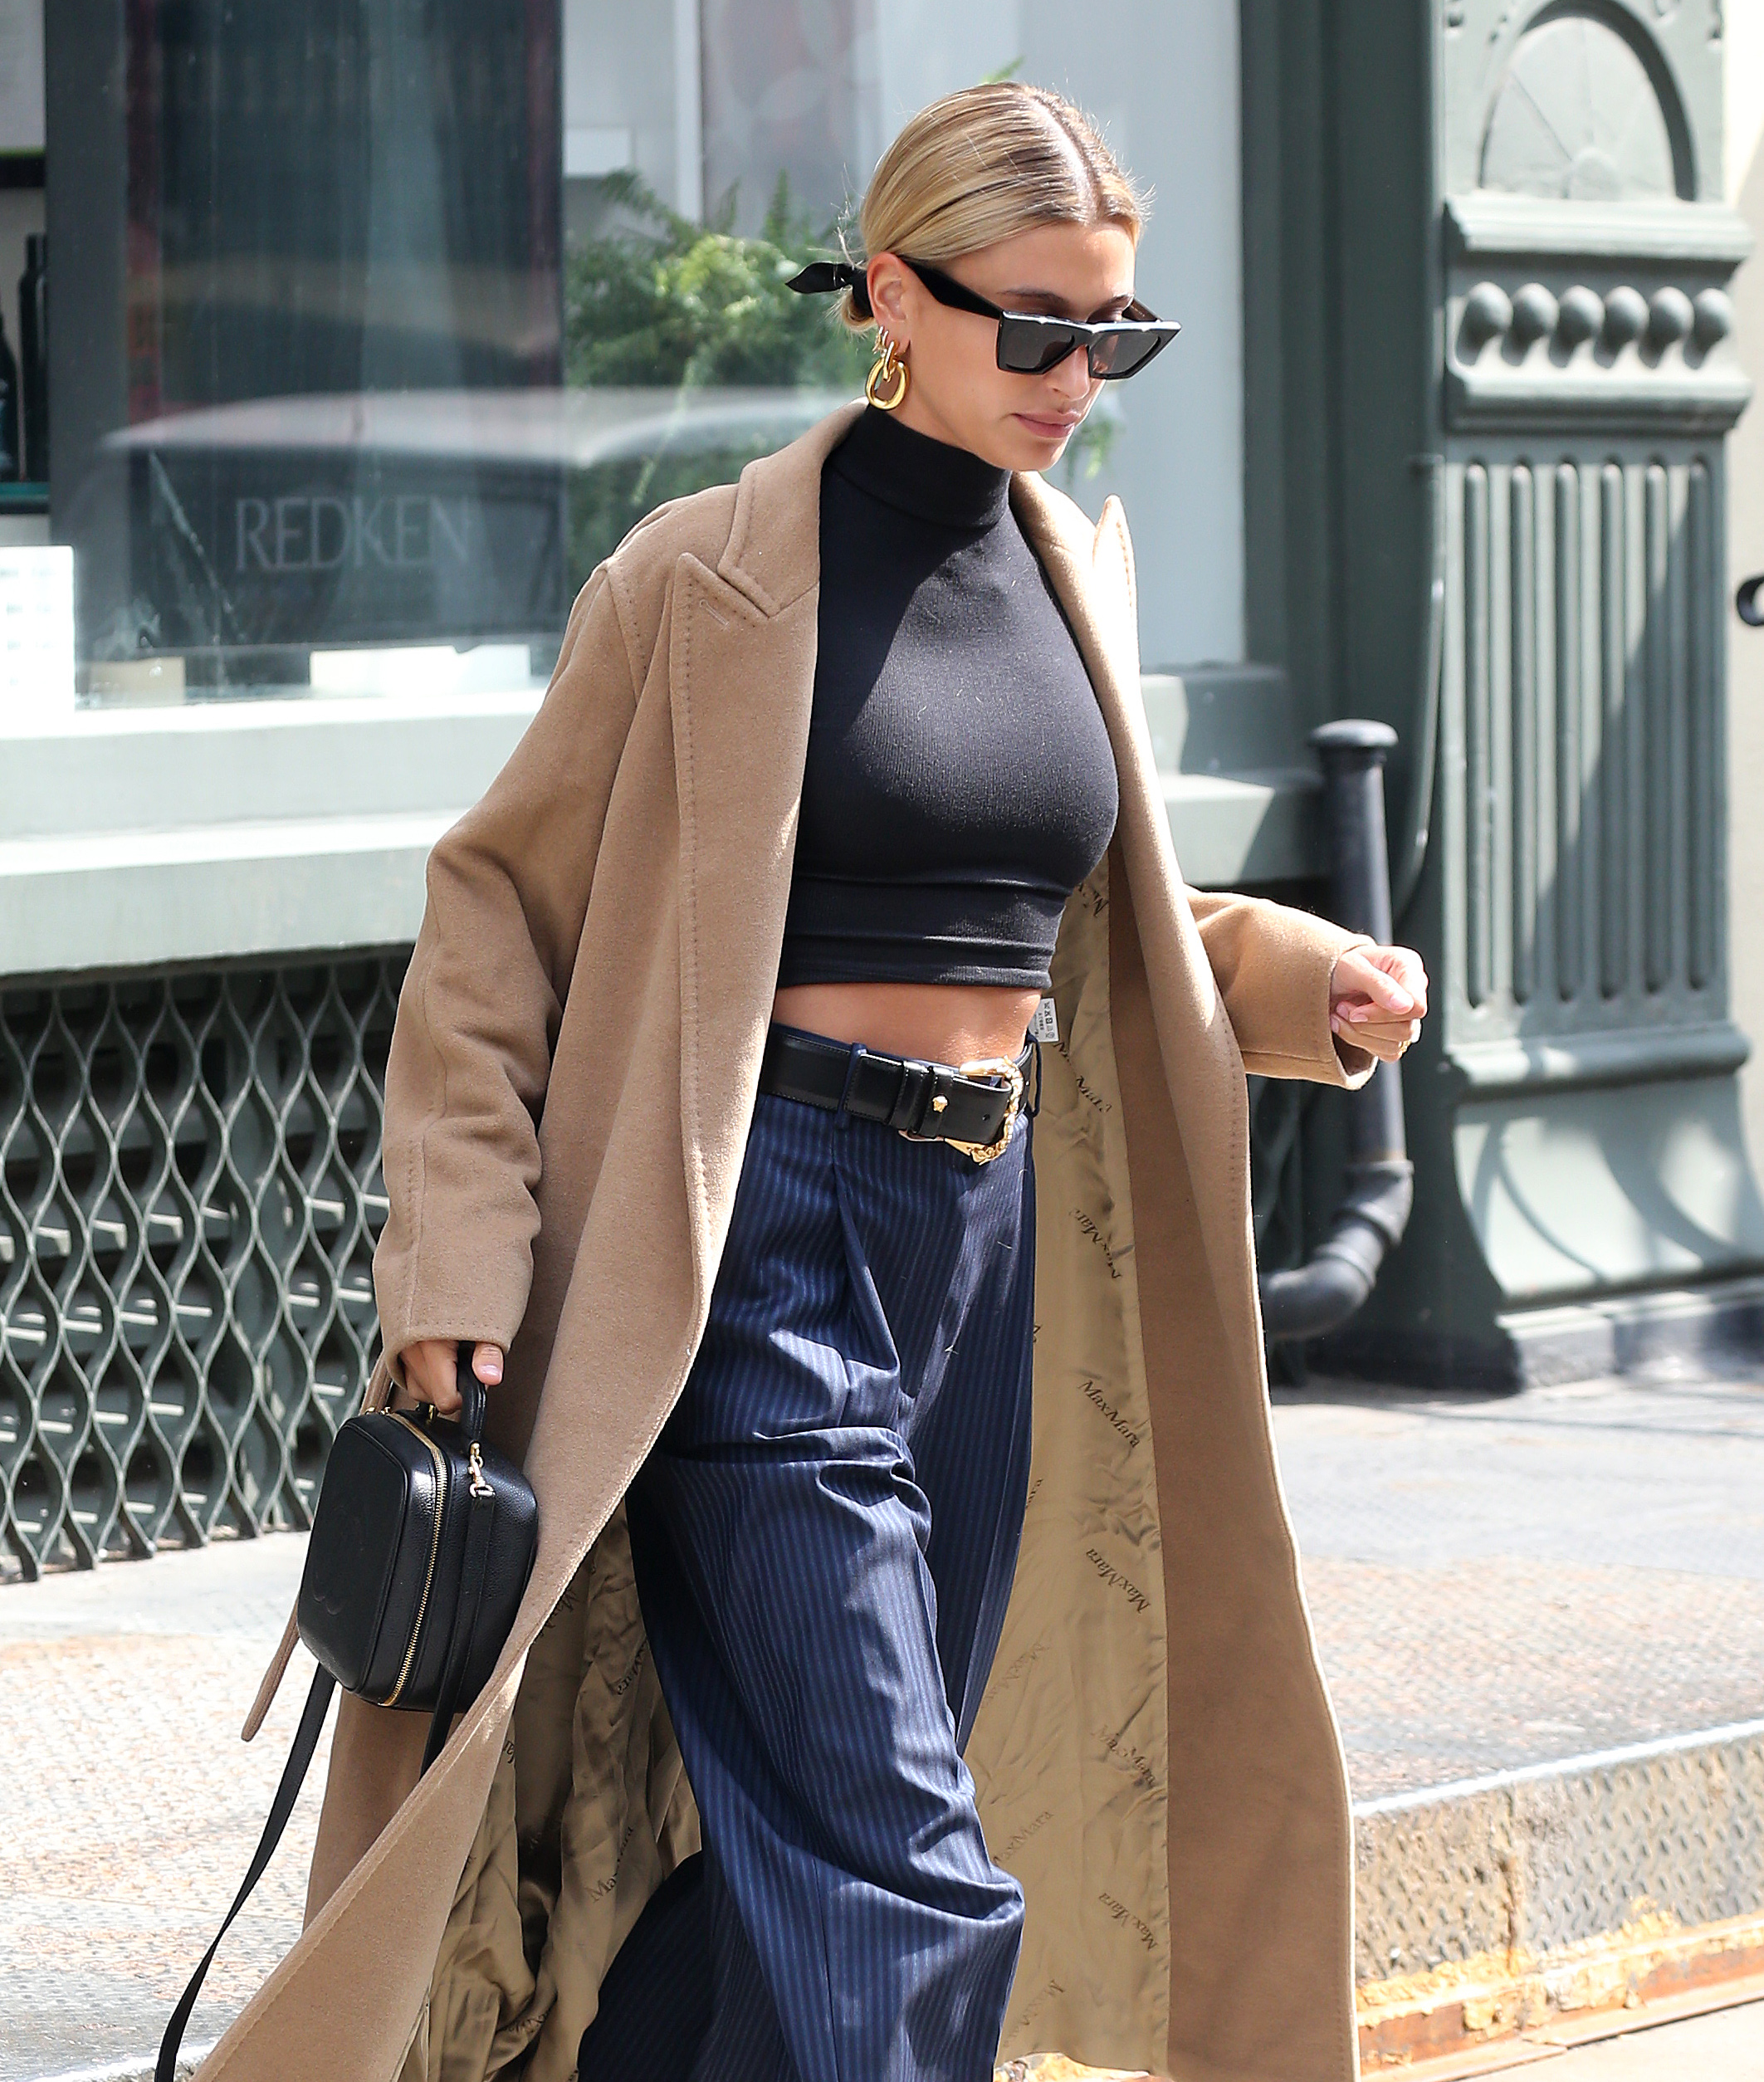 Hailey Bieber Style, Outfits, and Fashion